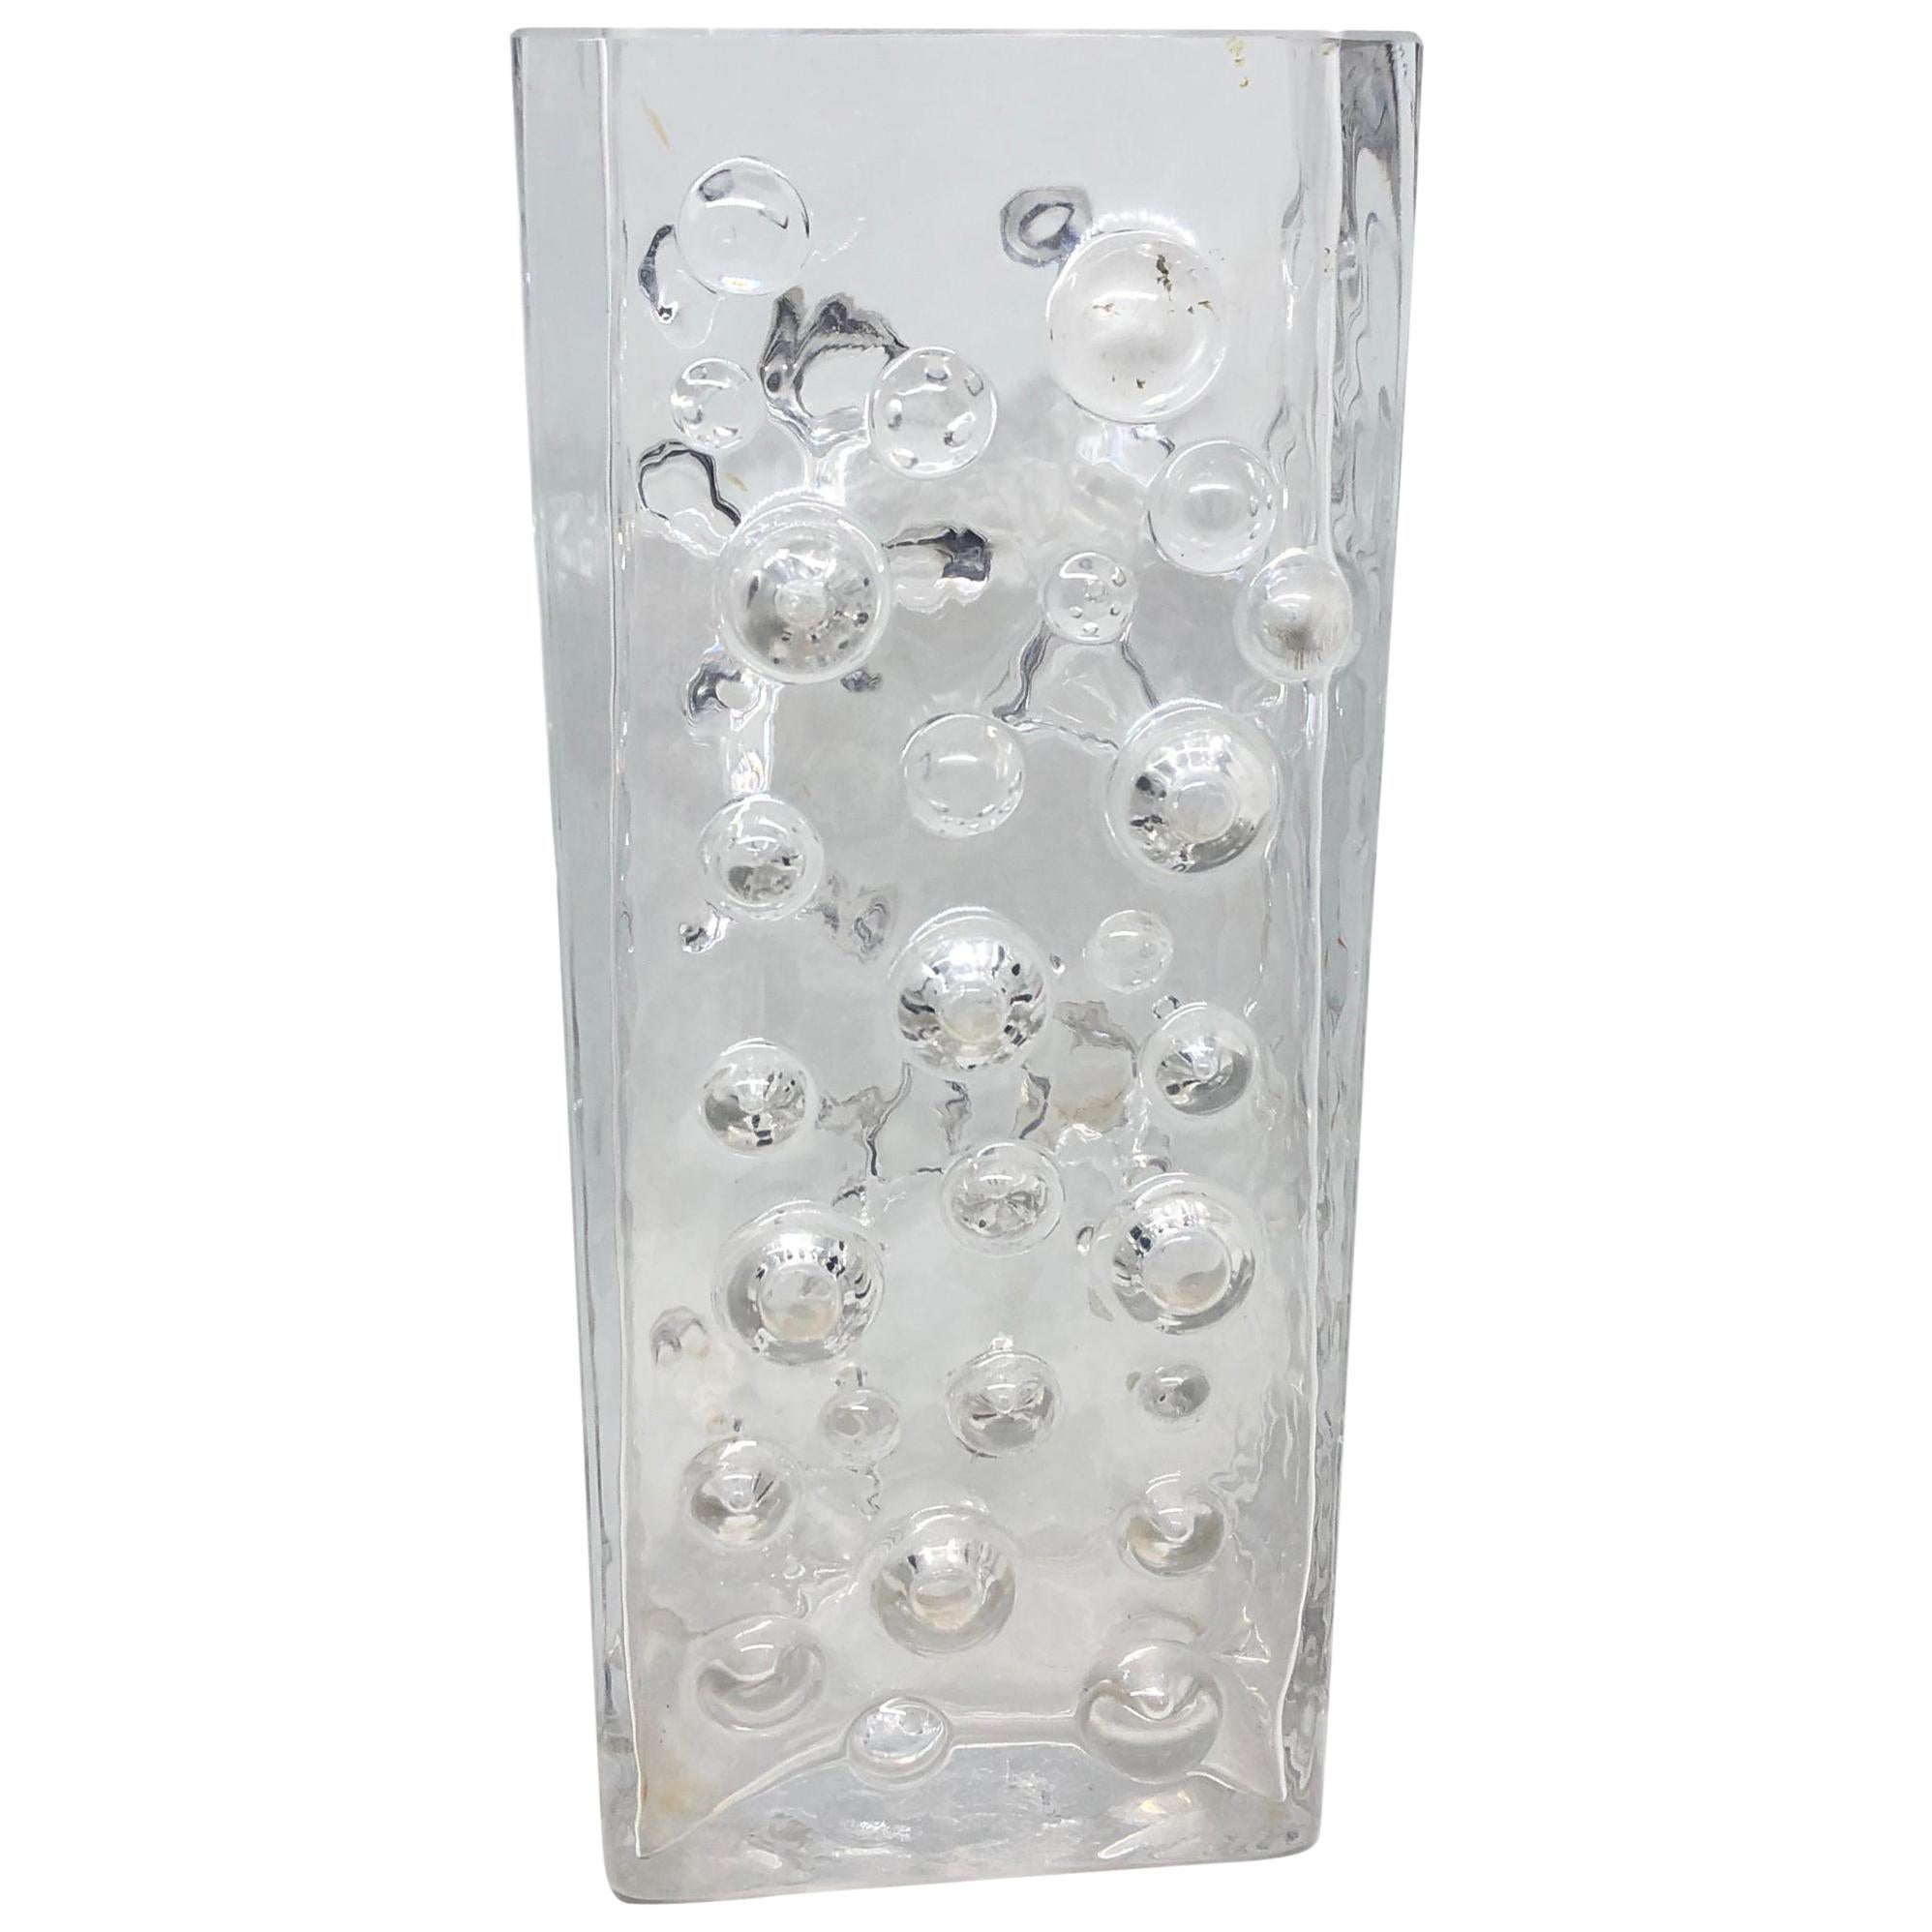 Rectangular Bubble Glass Vase by WMF Glas in Clear Color, circa 1970s For Sale